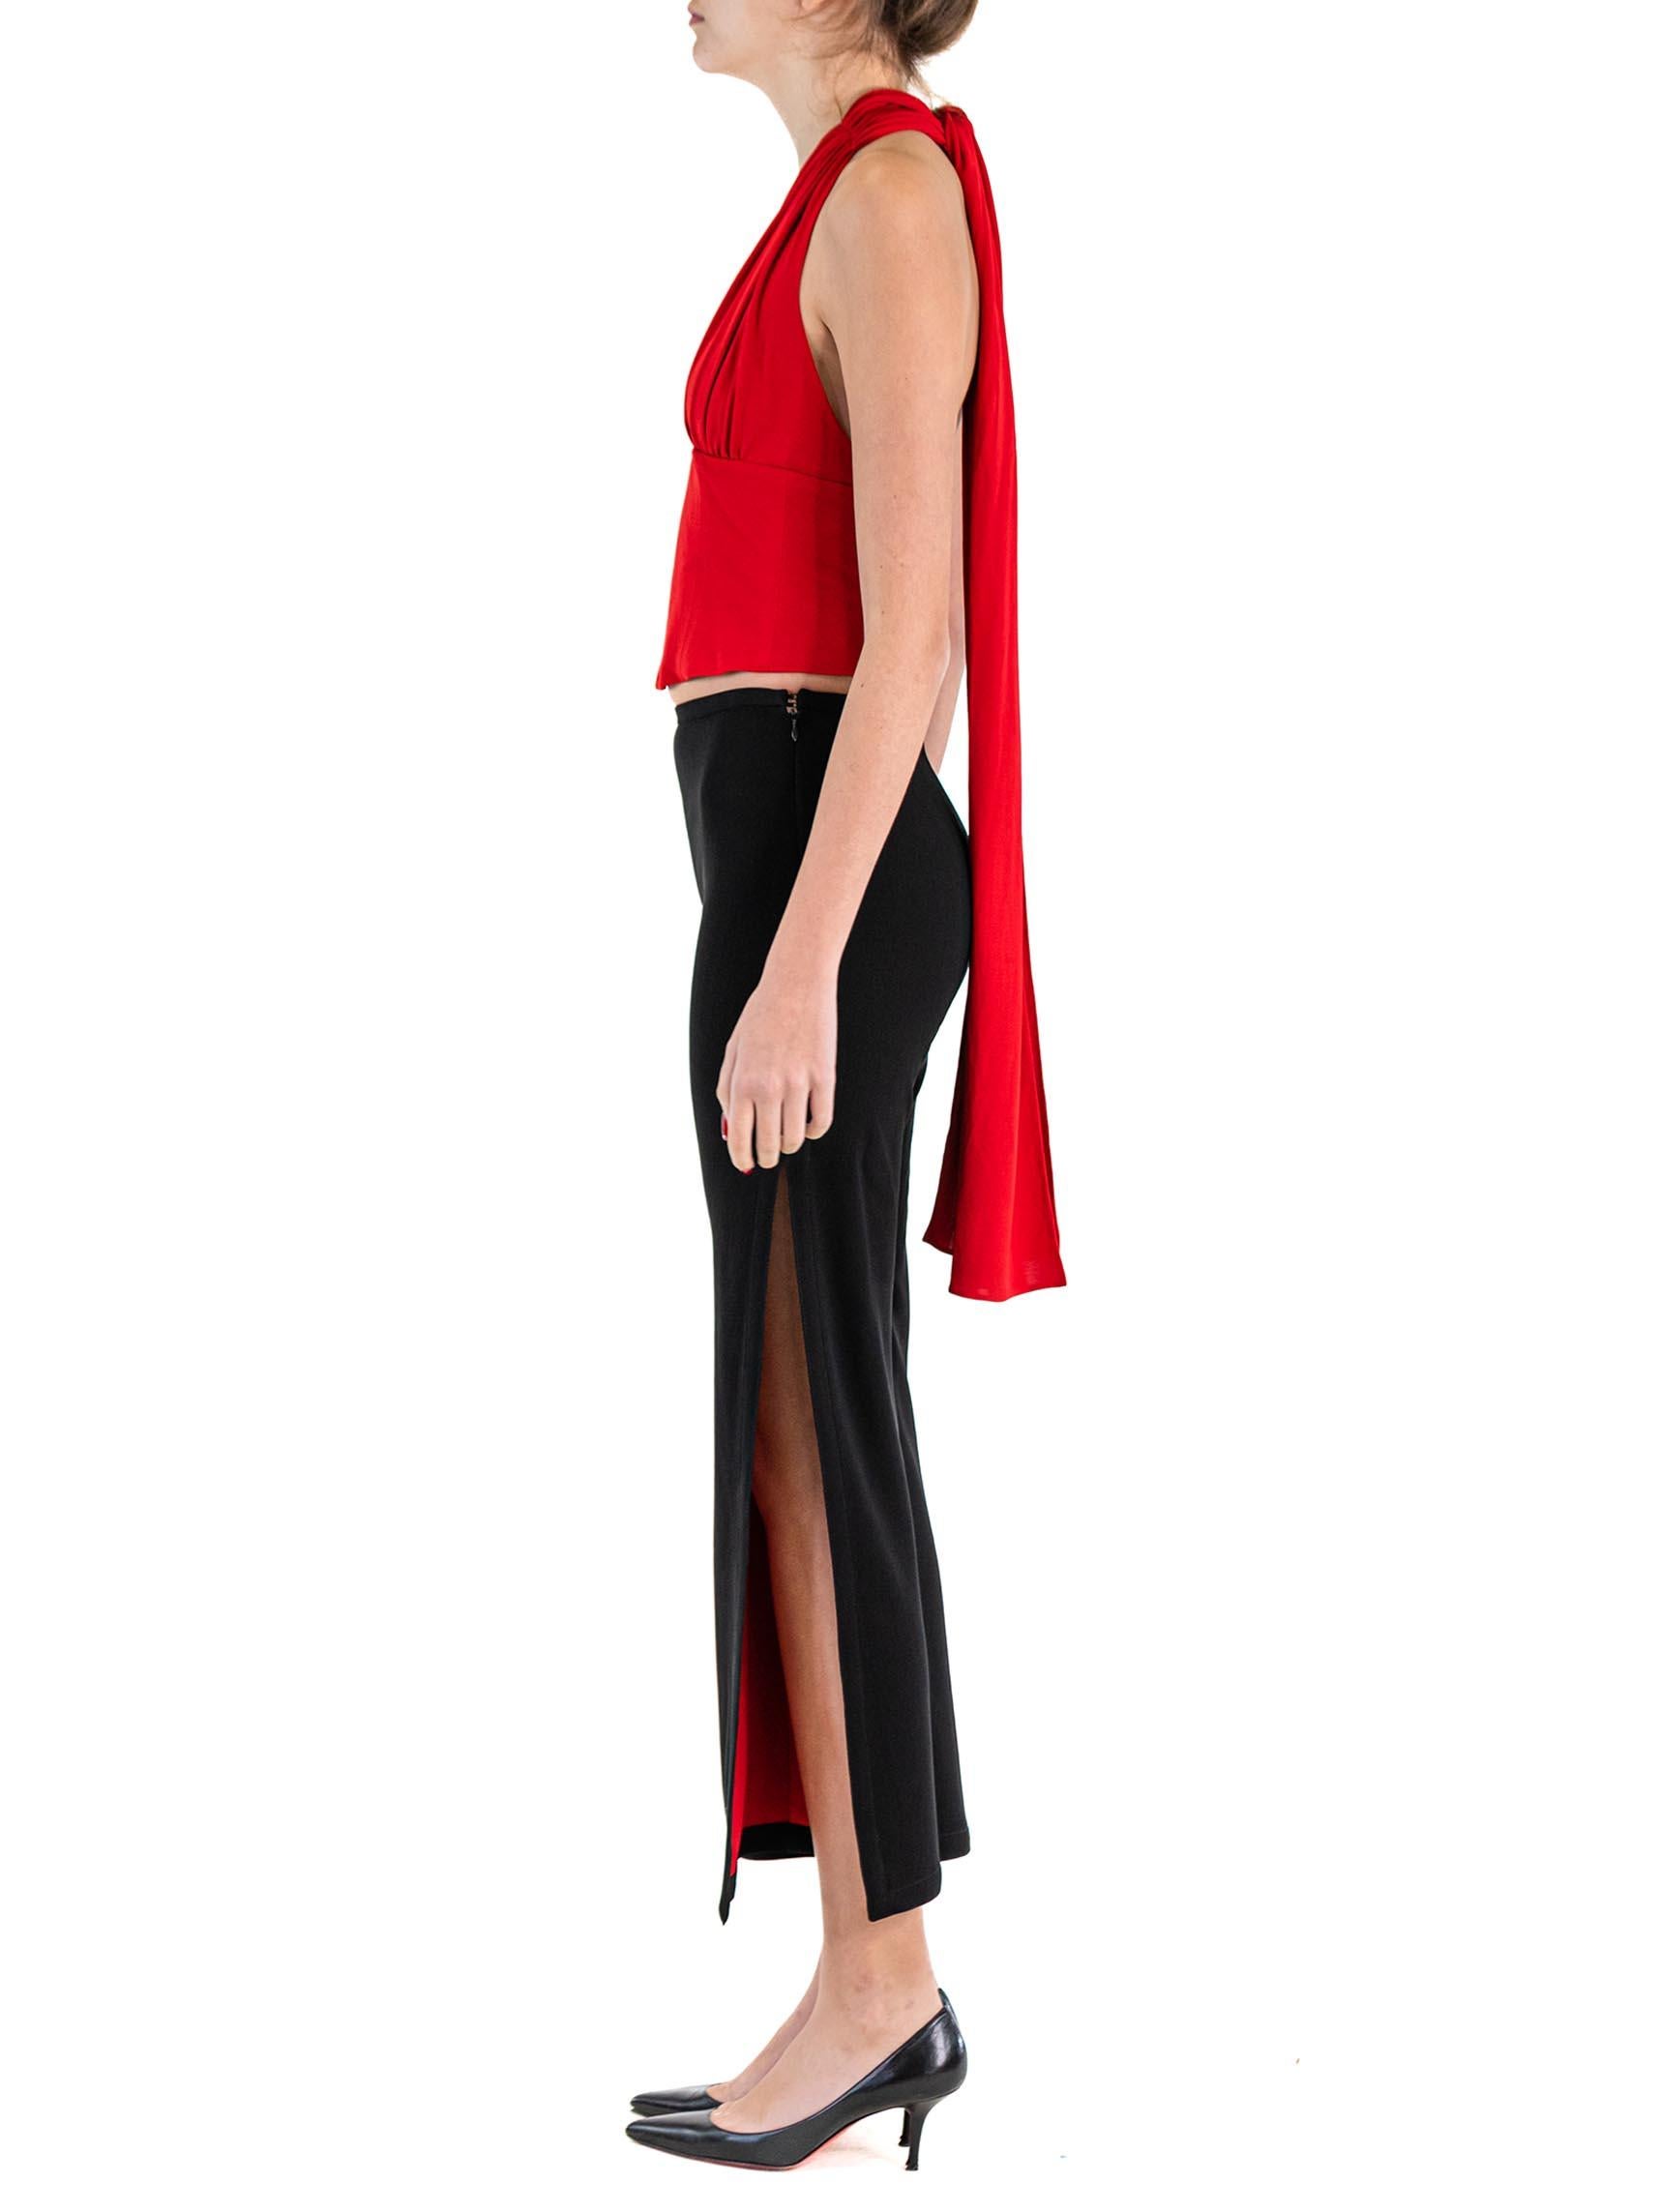 1990S HERVE LEGER Ruby Red & Black Rayon Lycra Jersey Deep V Top Pants Ensemble In Excellent Condition For Sale In New York, NY